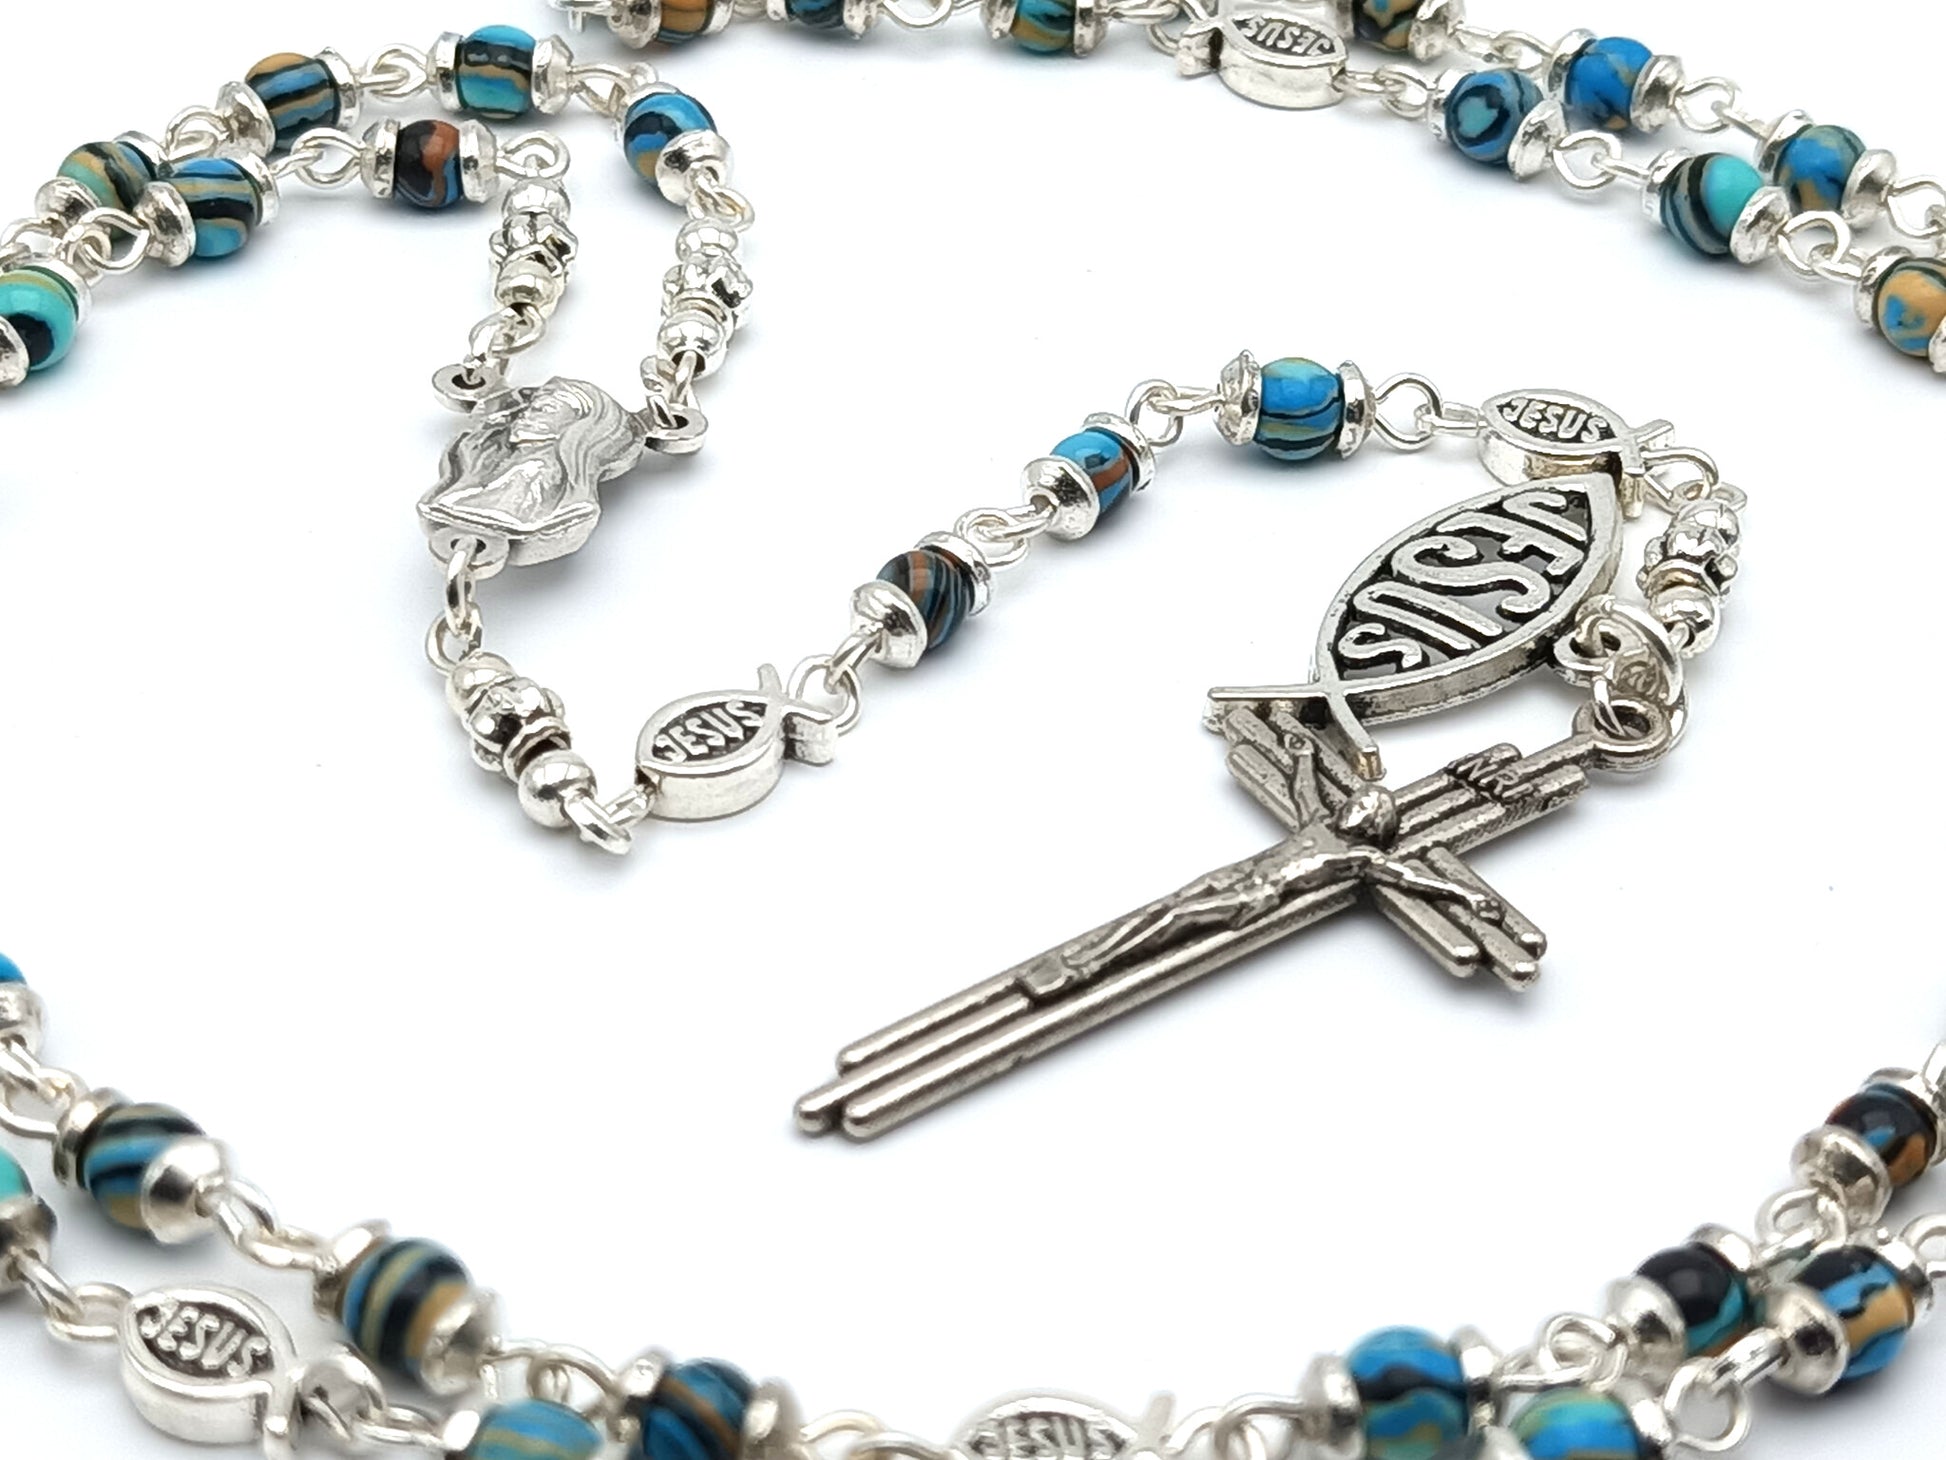 Miniature Icthus Jesus unique rosary beads with multicoloured gemstone beads, silver crucifix, Icthus pater beads and Virgin Mary centre medal.